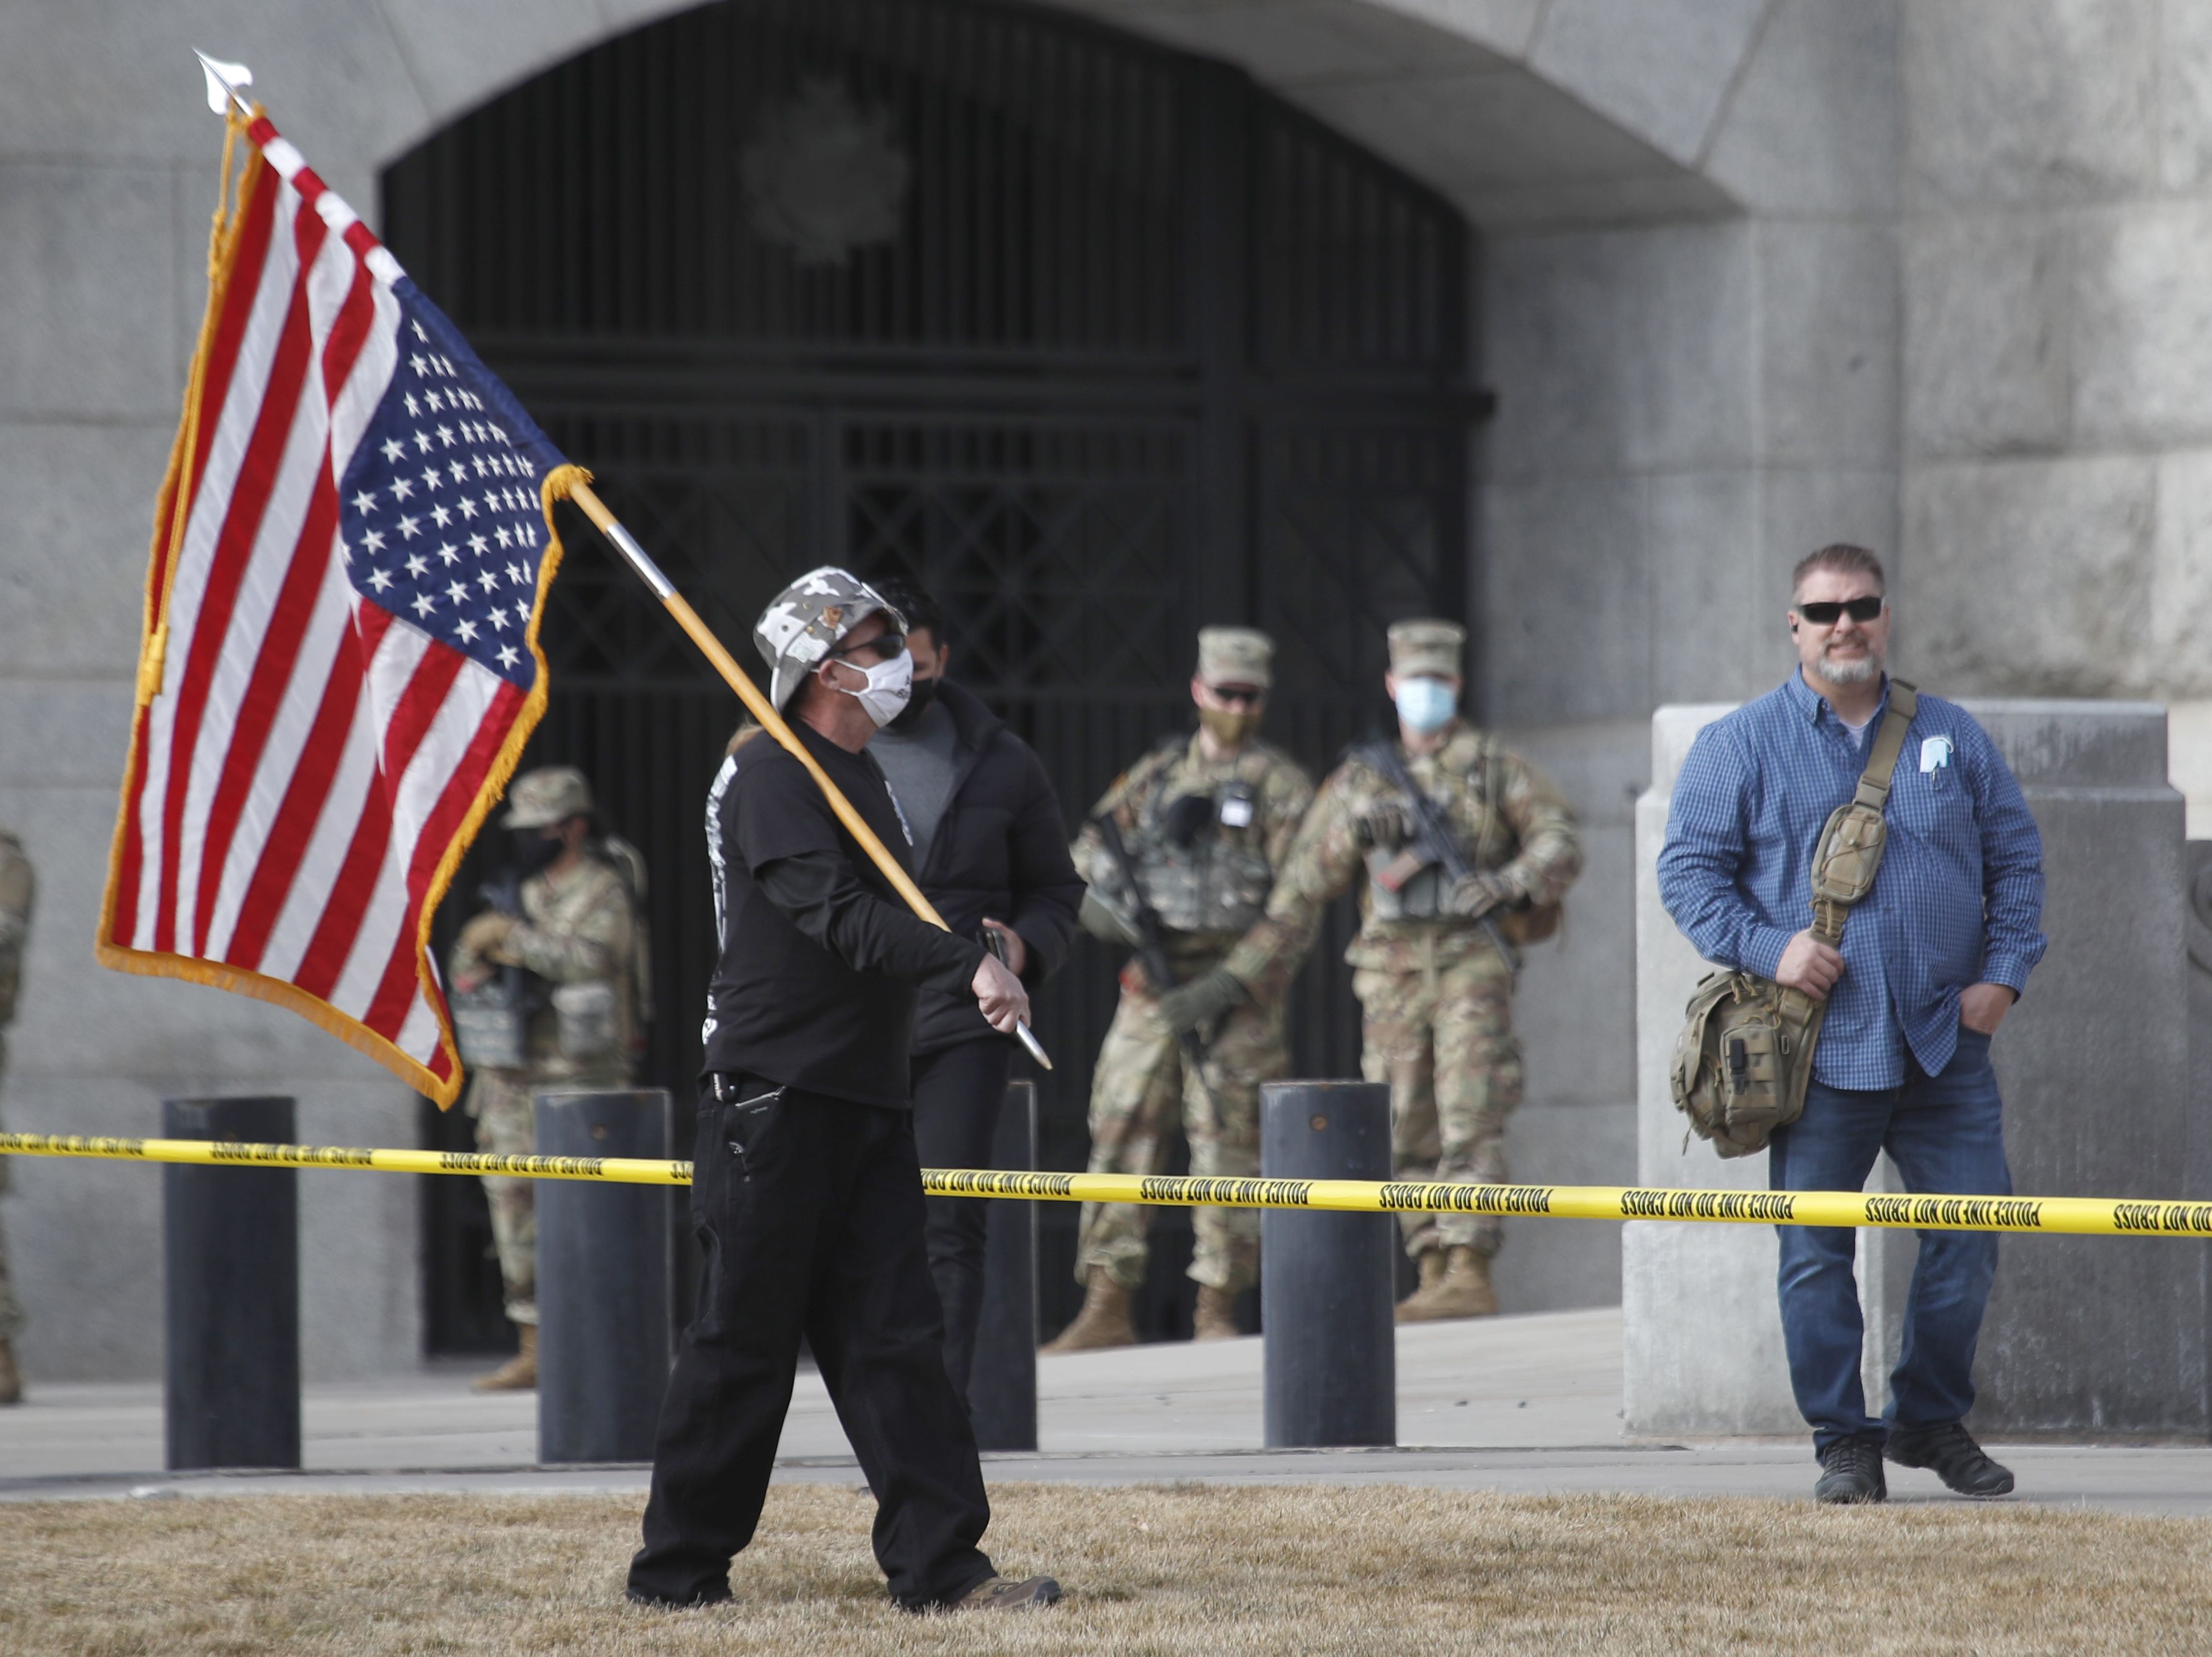 Members of the Utah National Guard stand watch as a man carries an upside down American flag as he walks the grounds of the Utah State Capitol building on January 17